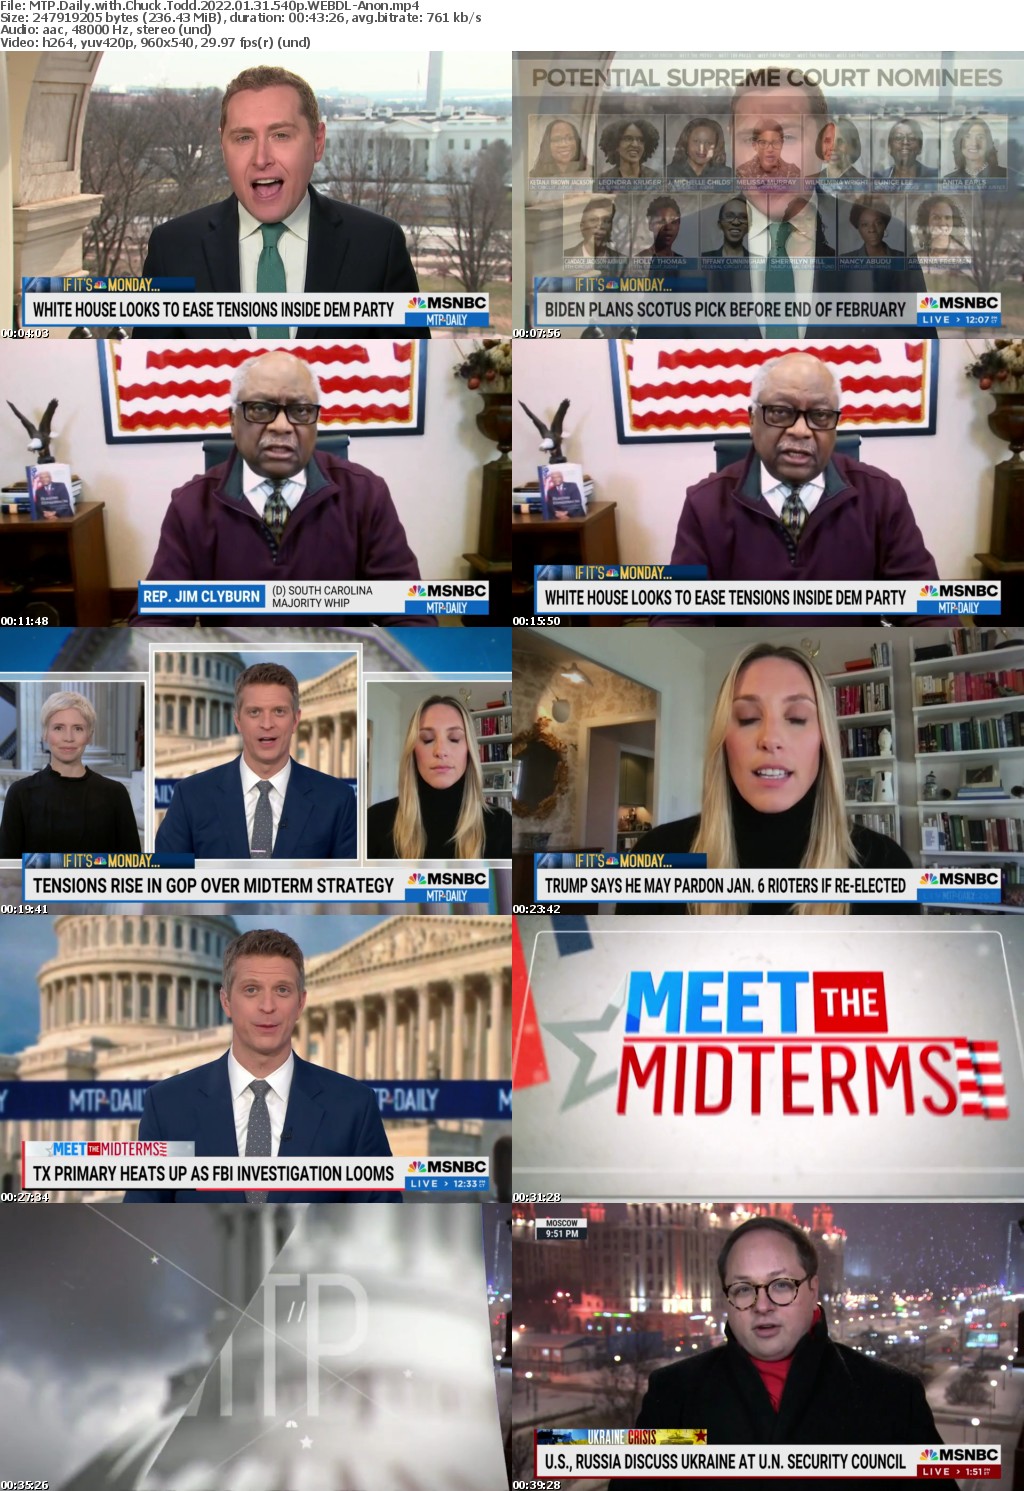 MTP Daily with Chuck Todd 2022 01 31 540p WEBDL-Anon